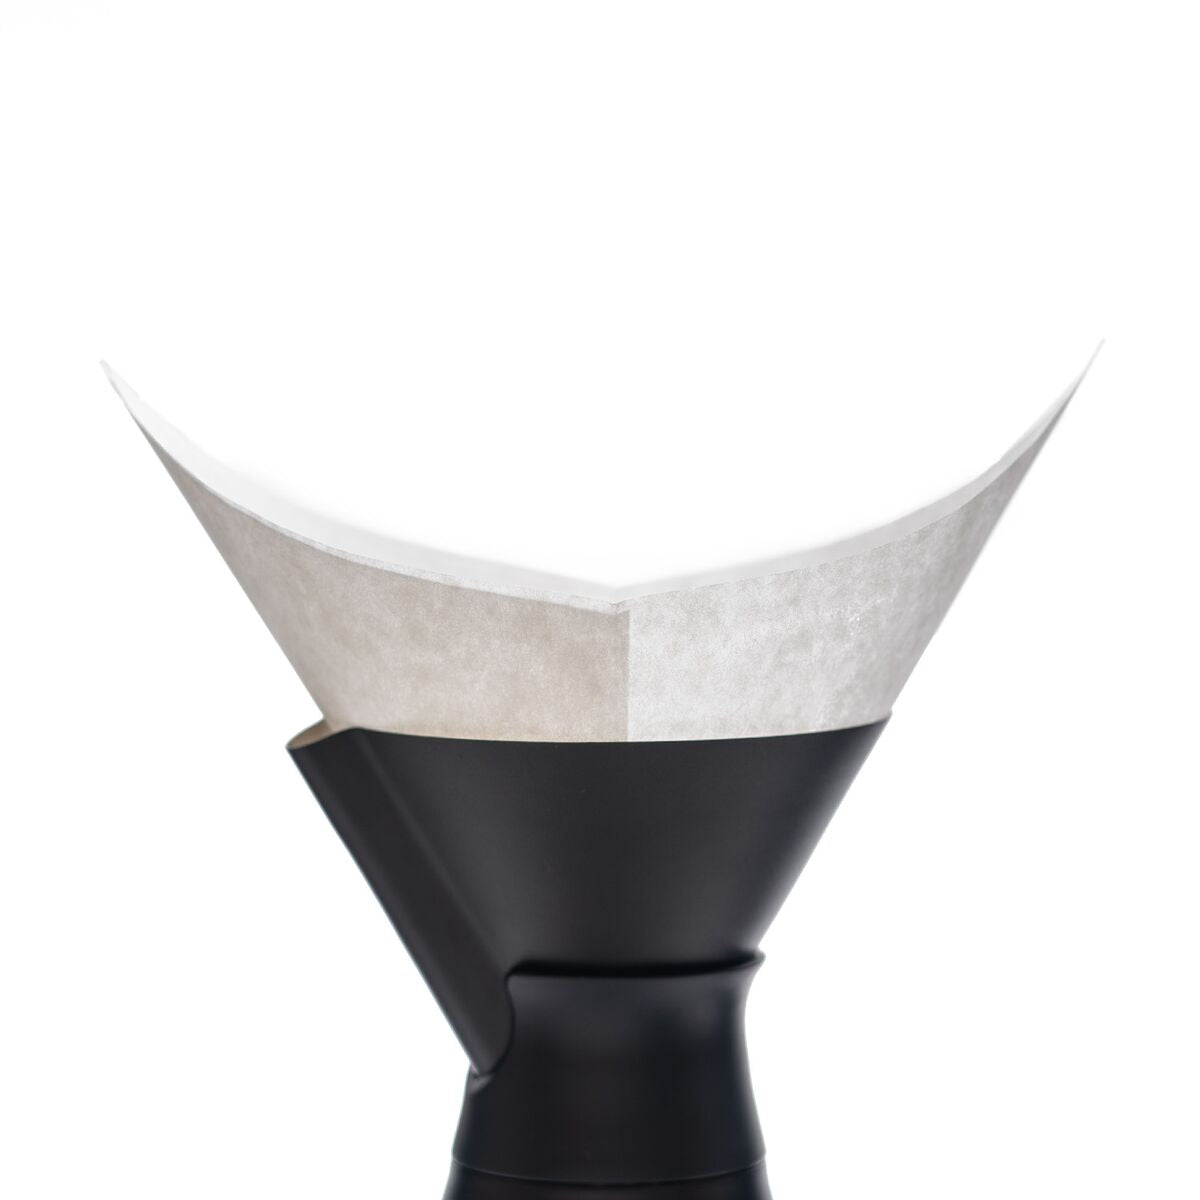 New Standard Carafe Coffee Filters